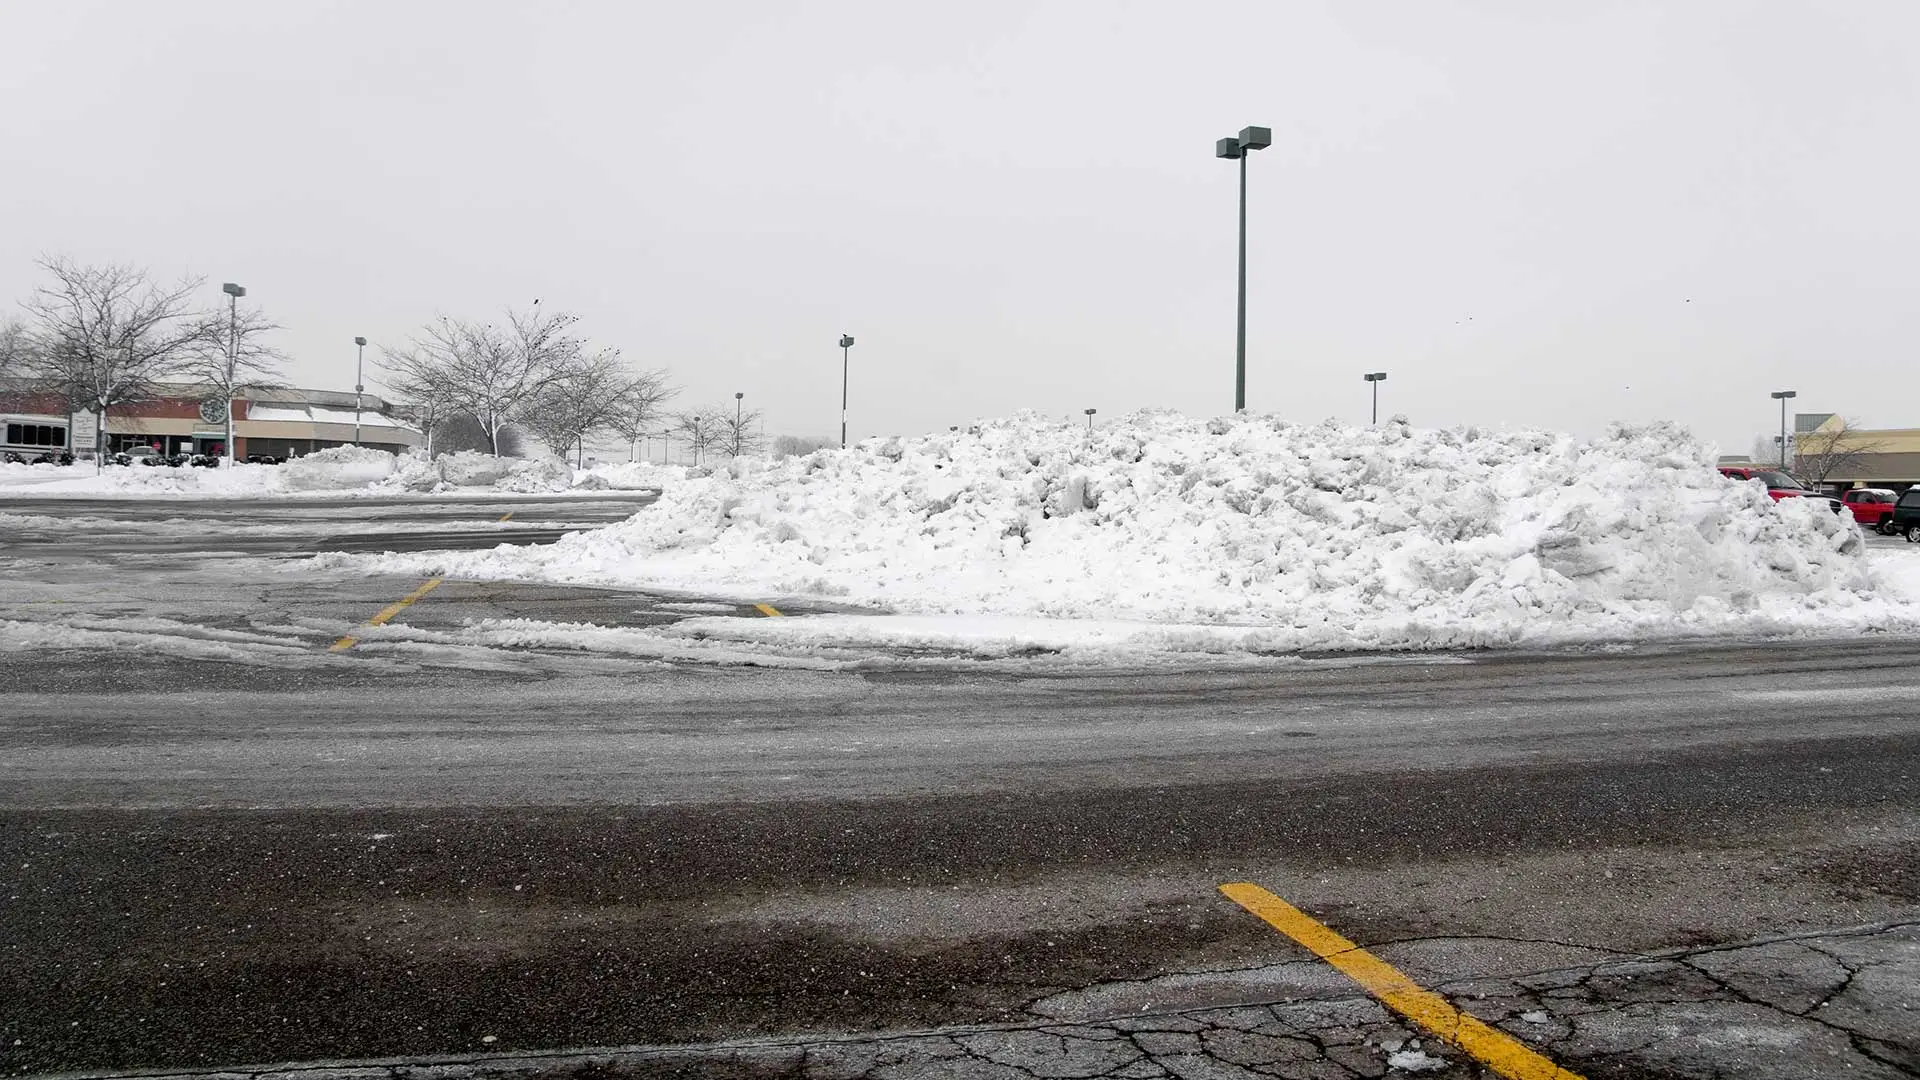 A parking lot in Waterloo, IL where we cleared and piled up snow.